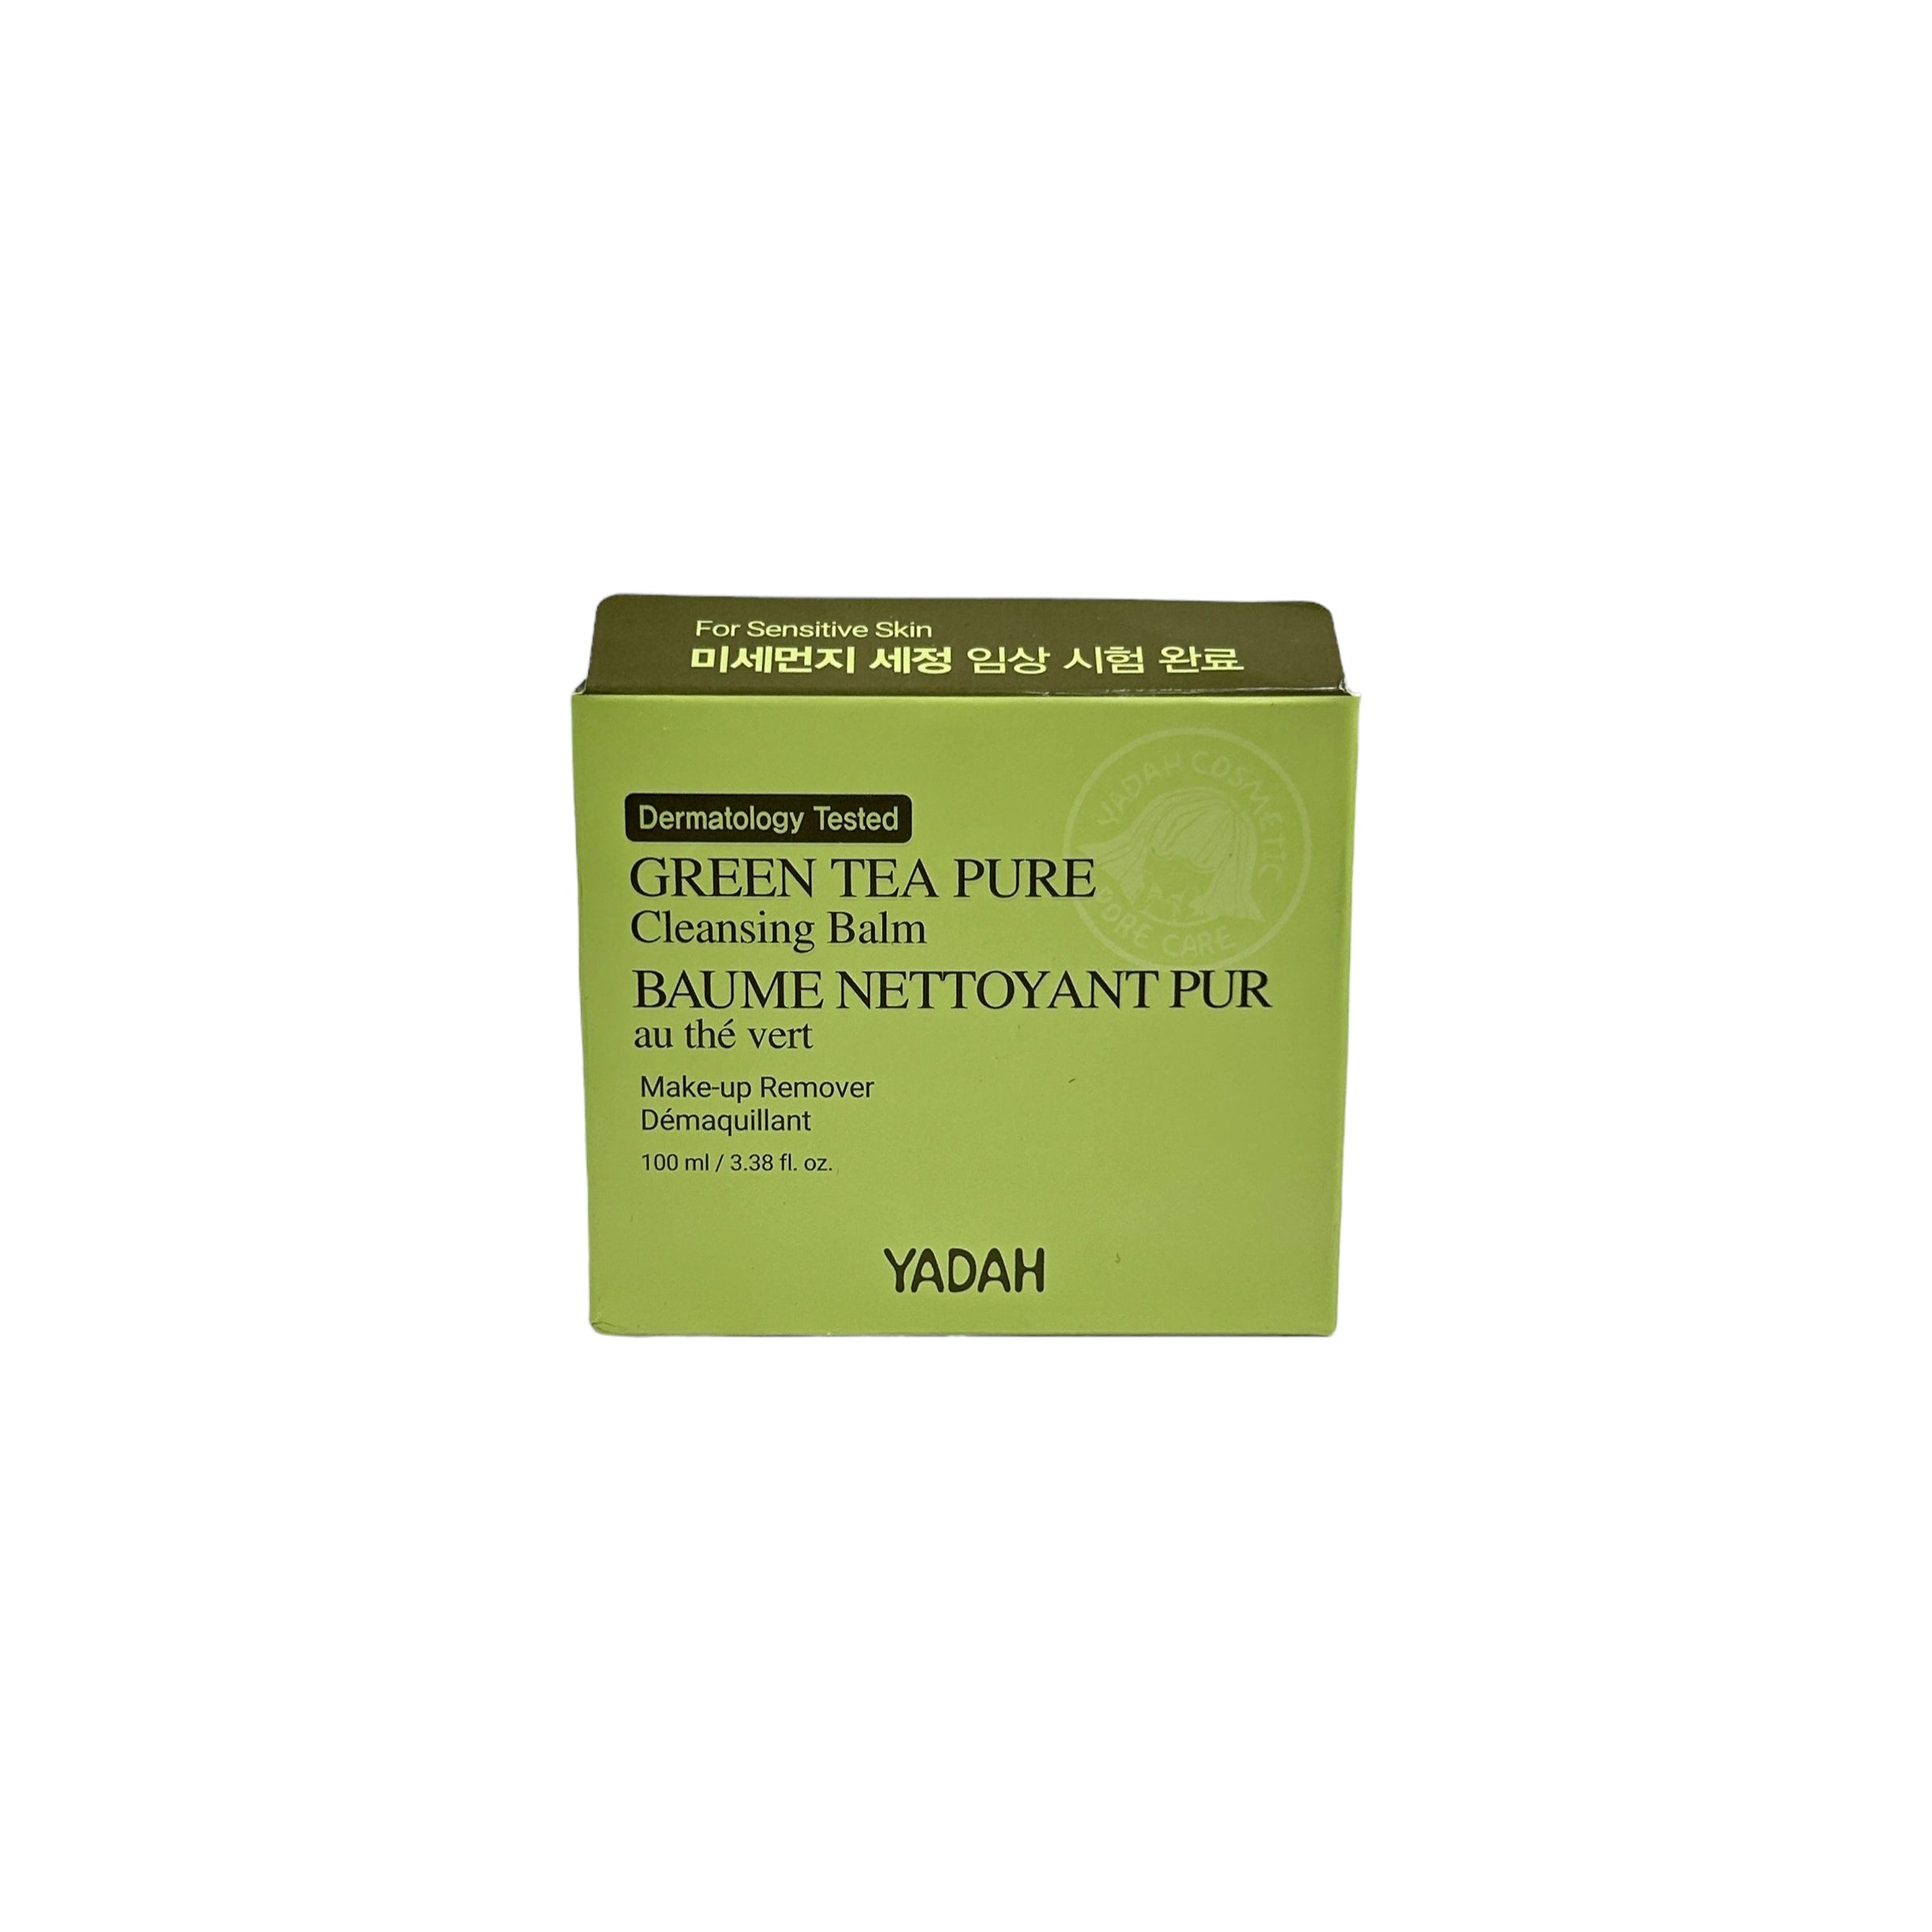 YADAH Green Tea Pure Cleansing Balm Make-up Remover